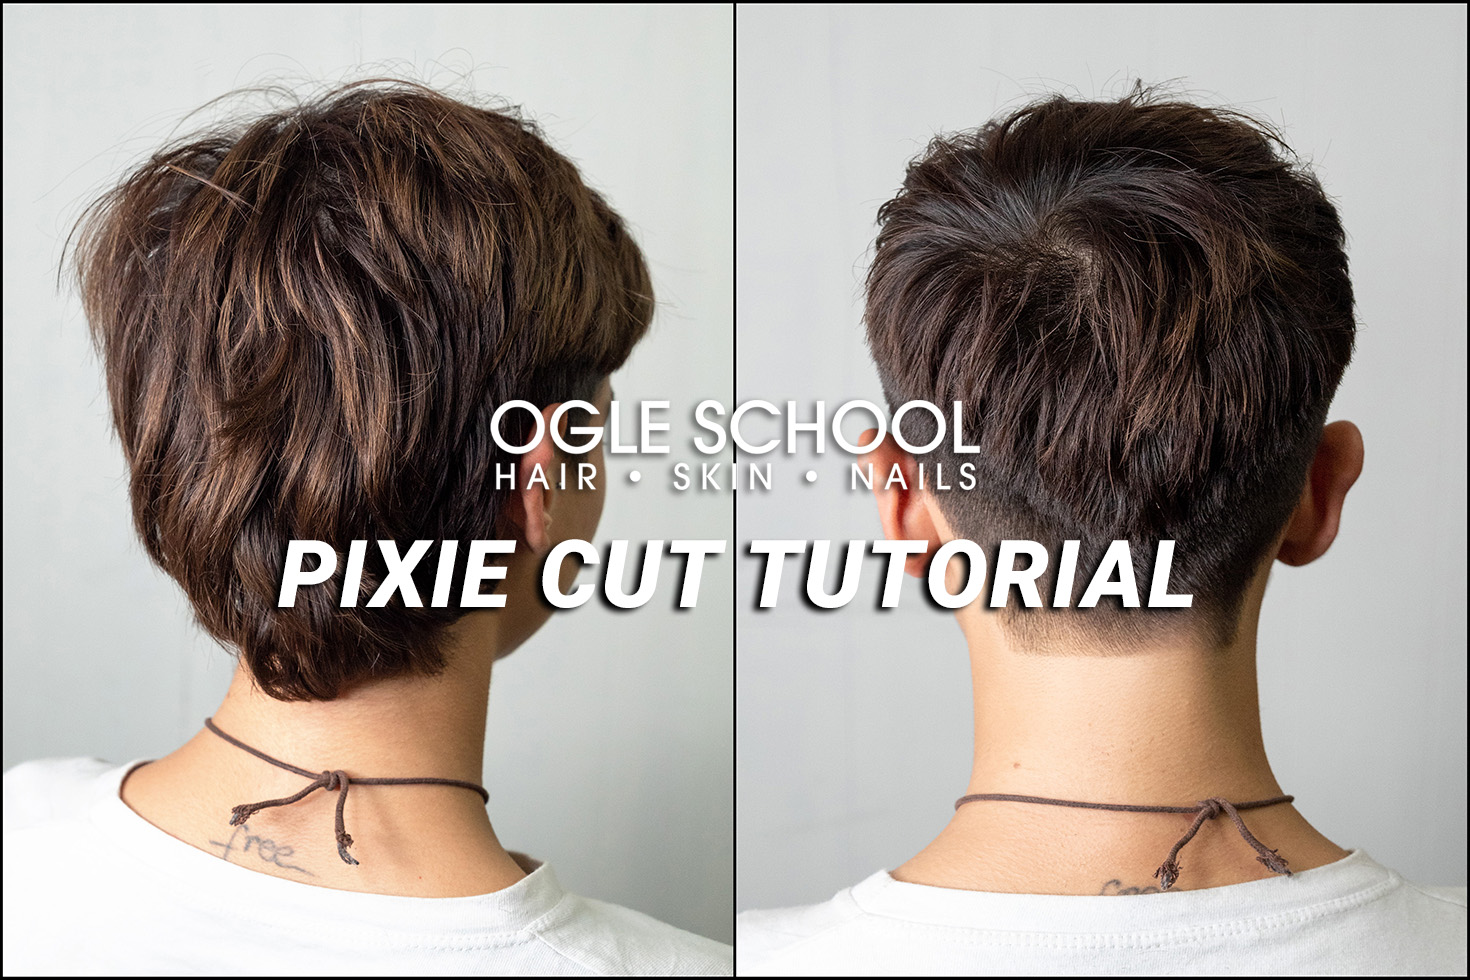 HAIRCUT TUTORIAL: HOW TO CUT YOUR PIXIE AT HOME. Haircutting / Trimming  short hair for men and women 